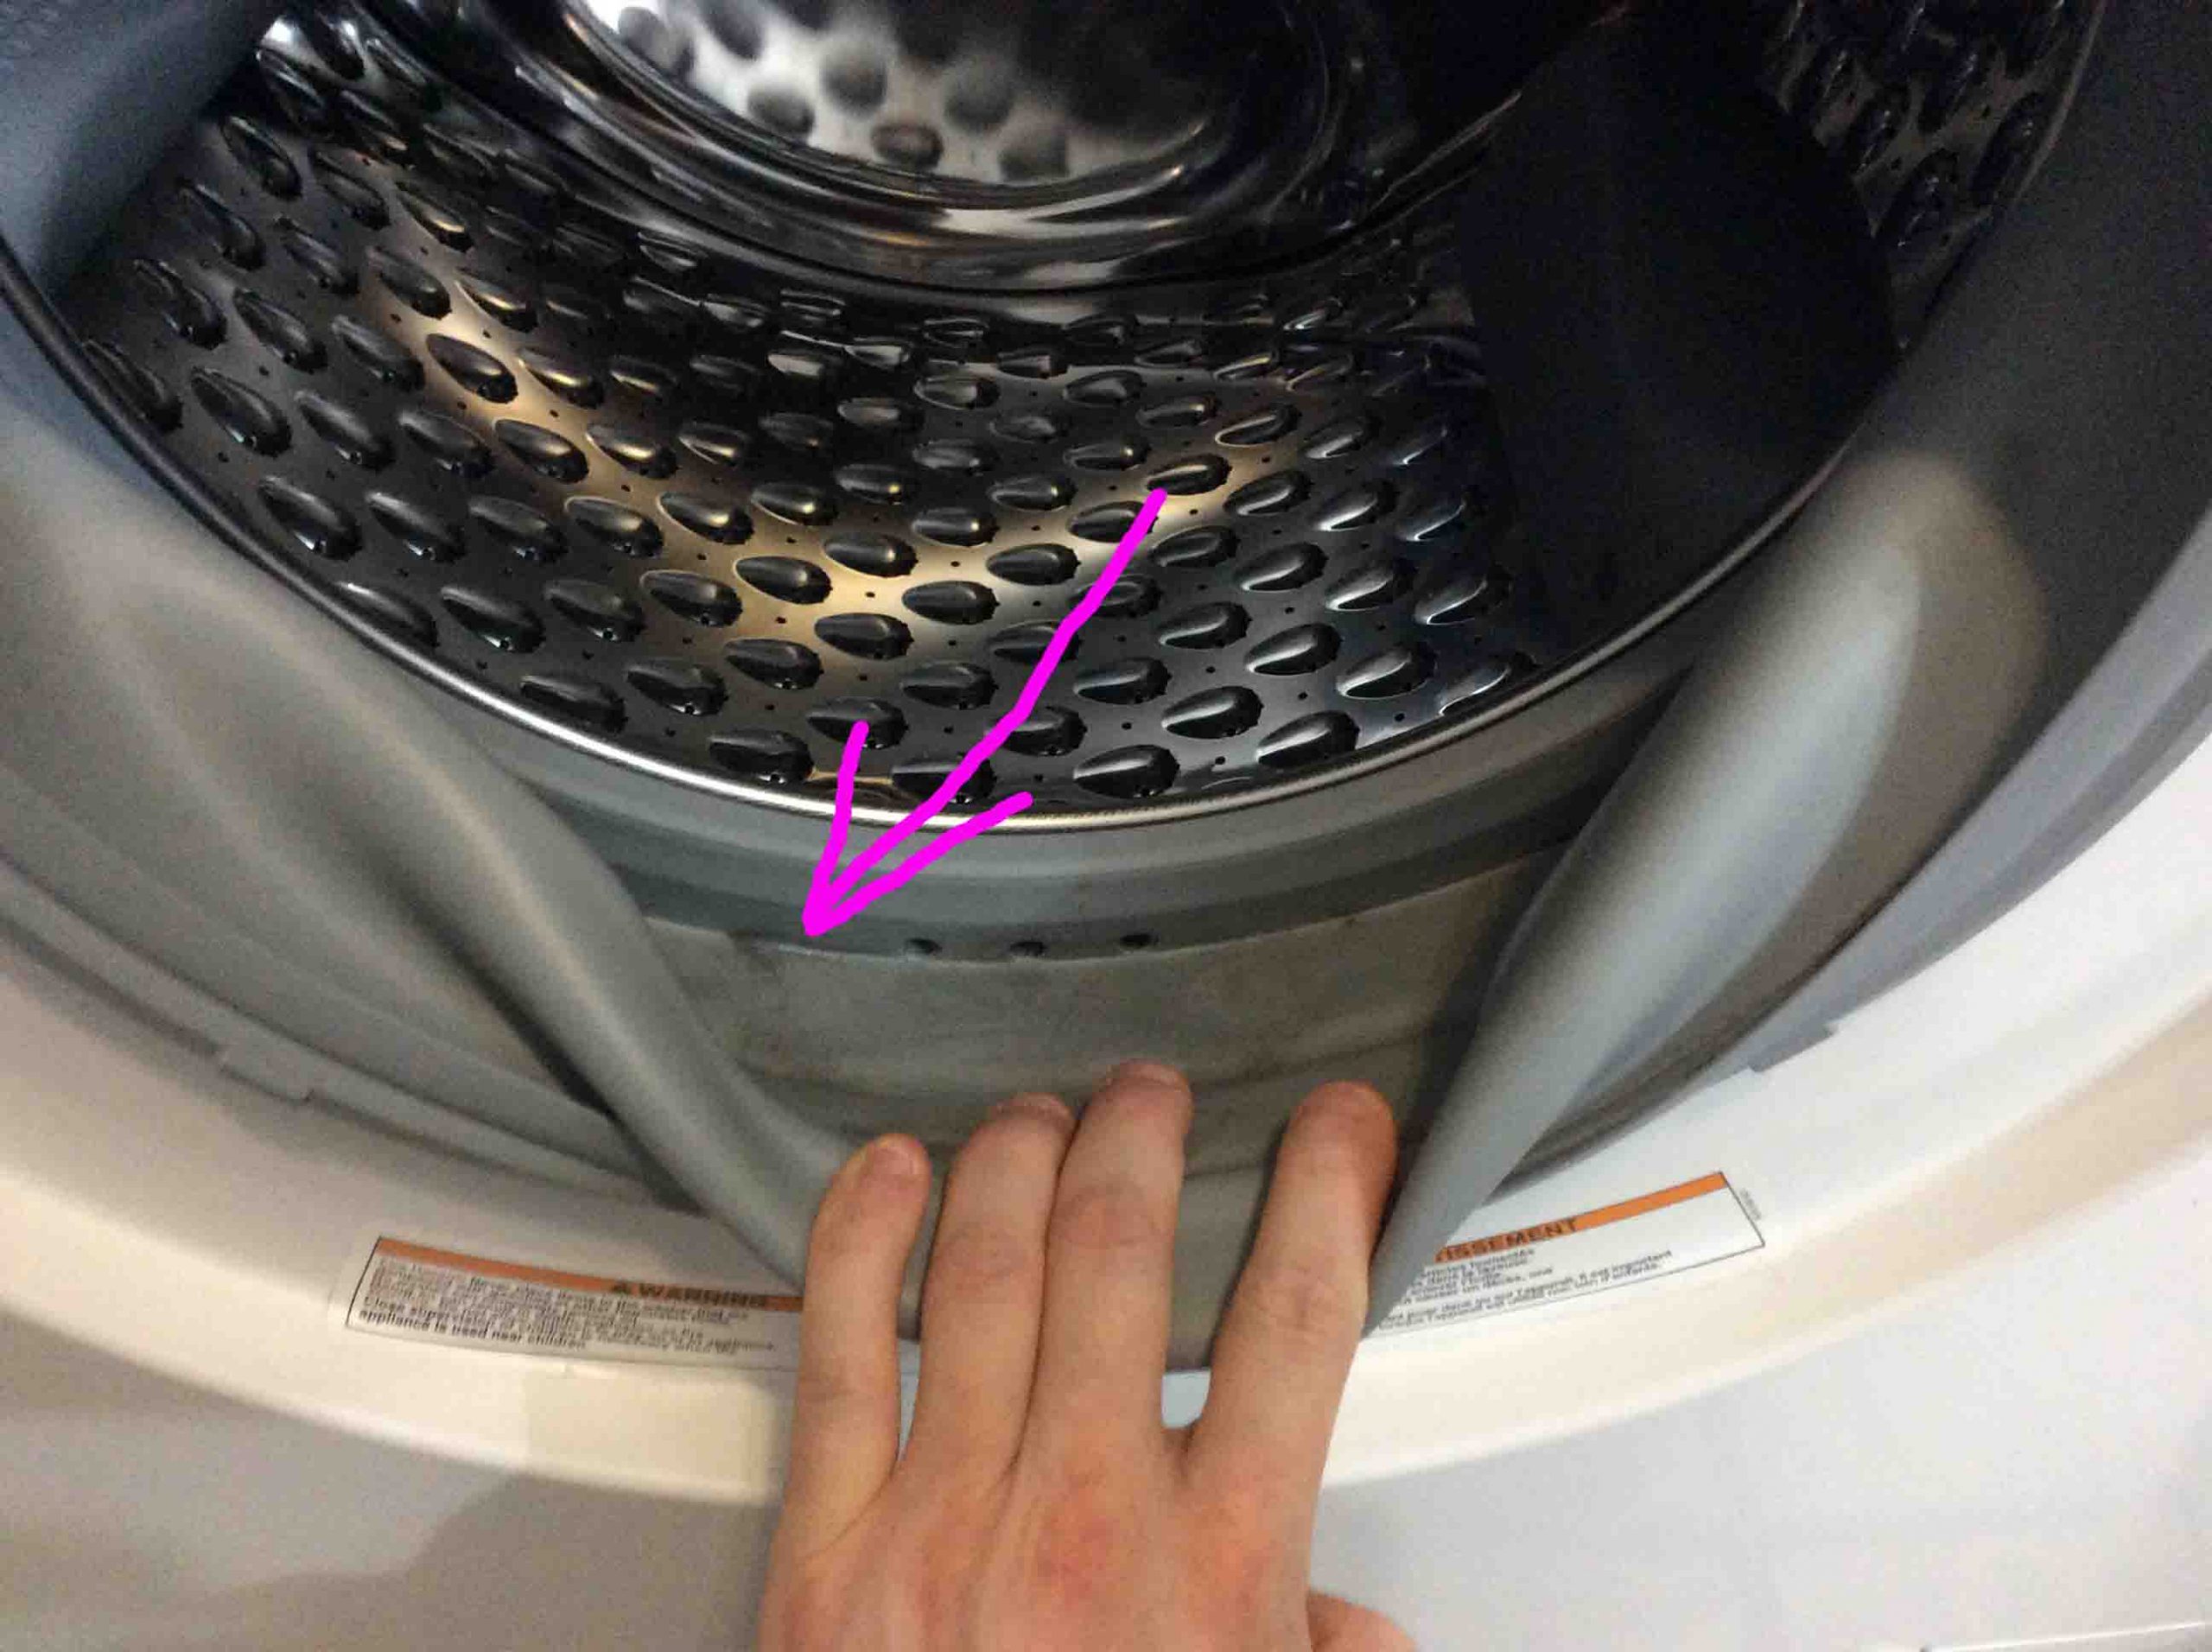 How To Clean Washer Gasket How to Clean Mold from Front Load Washer Gasket - Tom's Tek Stop